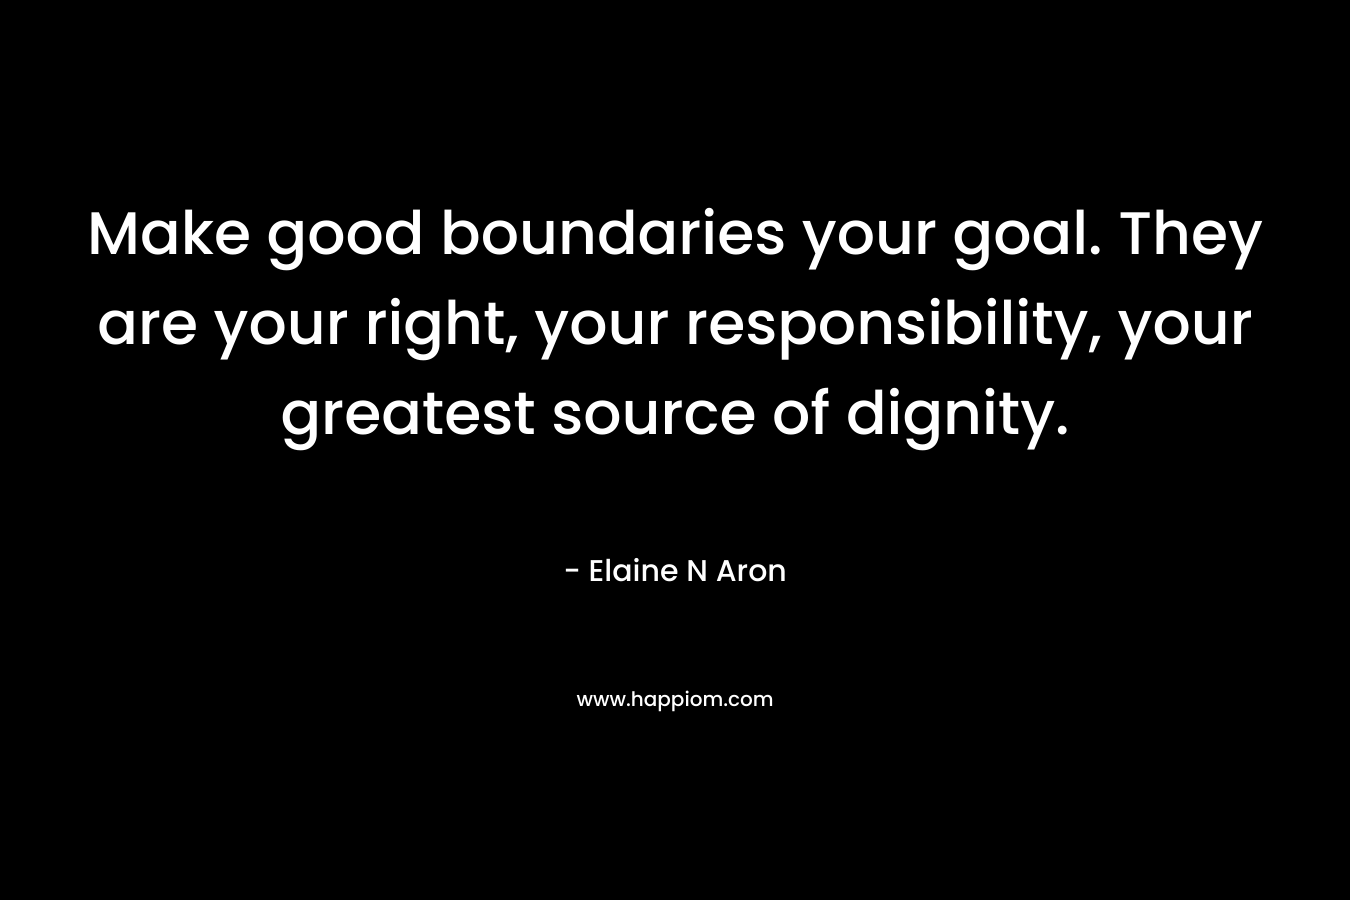 Make good boundaries your goal. They are your right, your responsibility, your greatest source of dignity. – Elaine N Aron